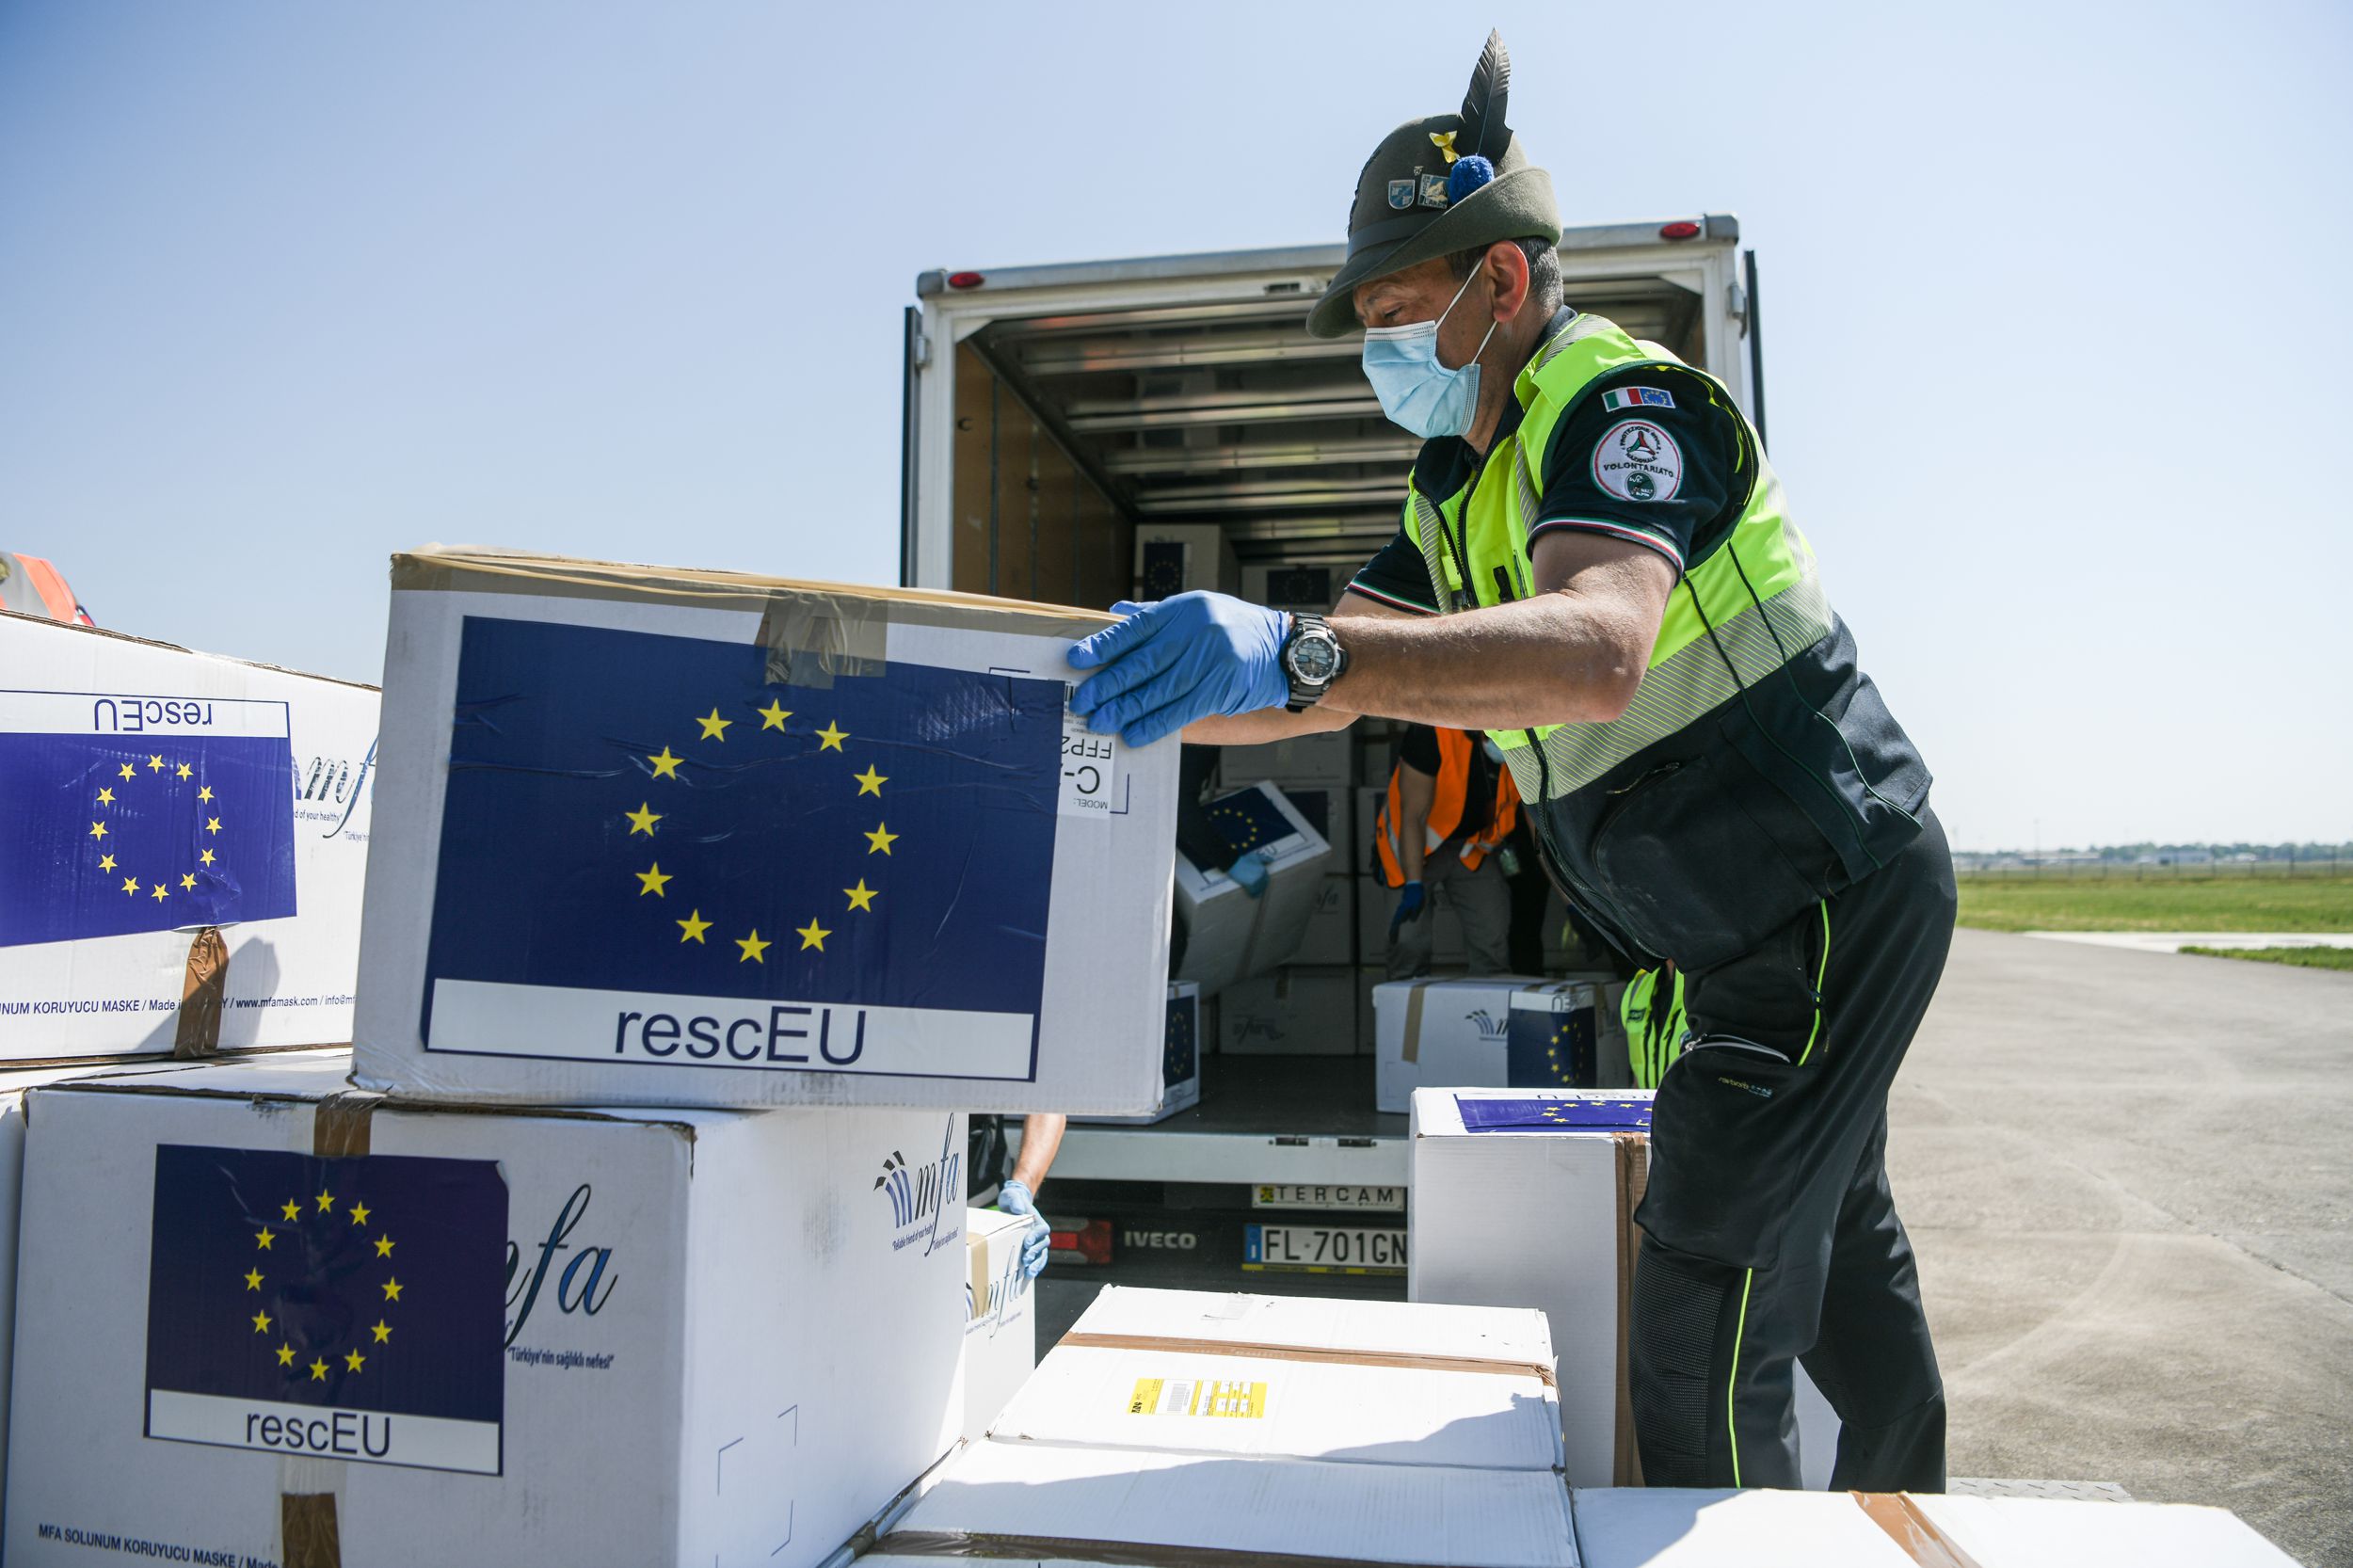 The “rescEU” system helps countries to combat natural disasters